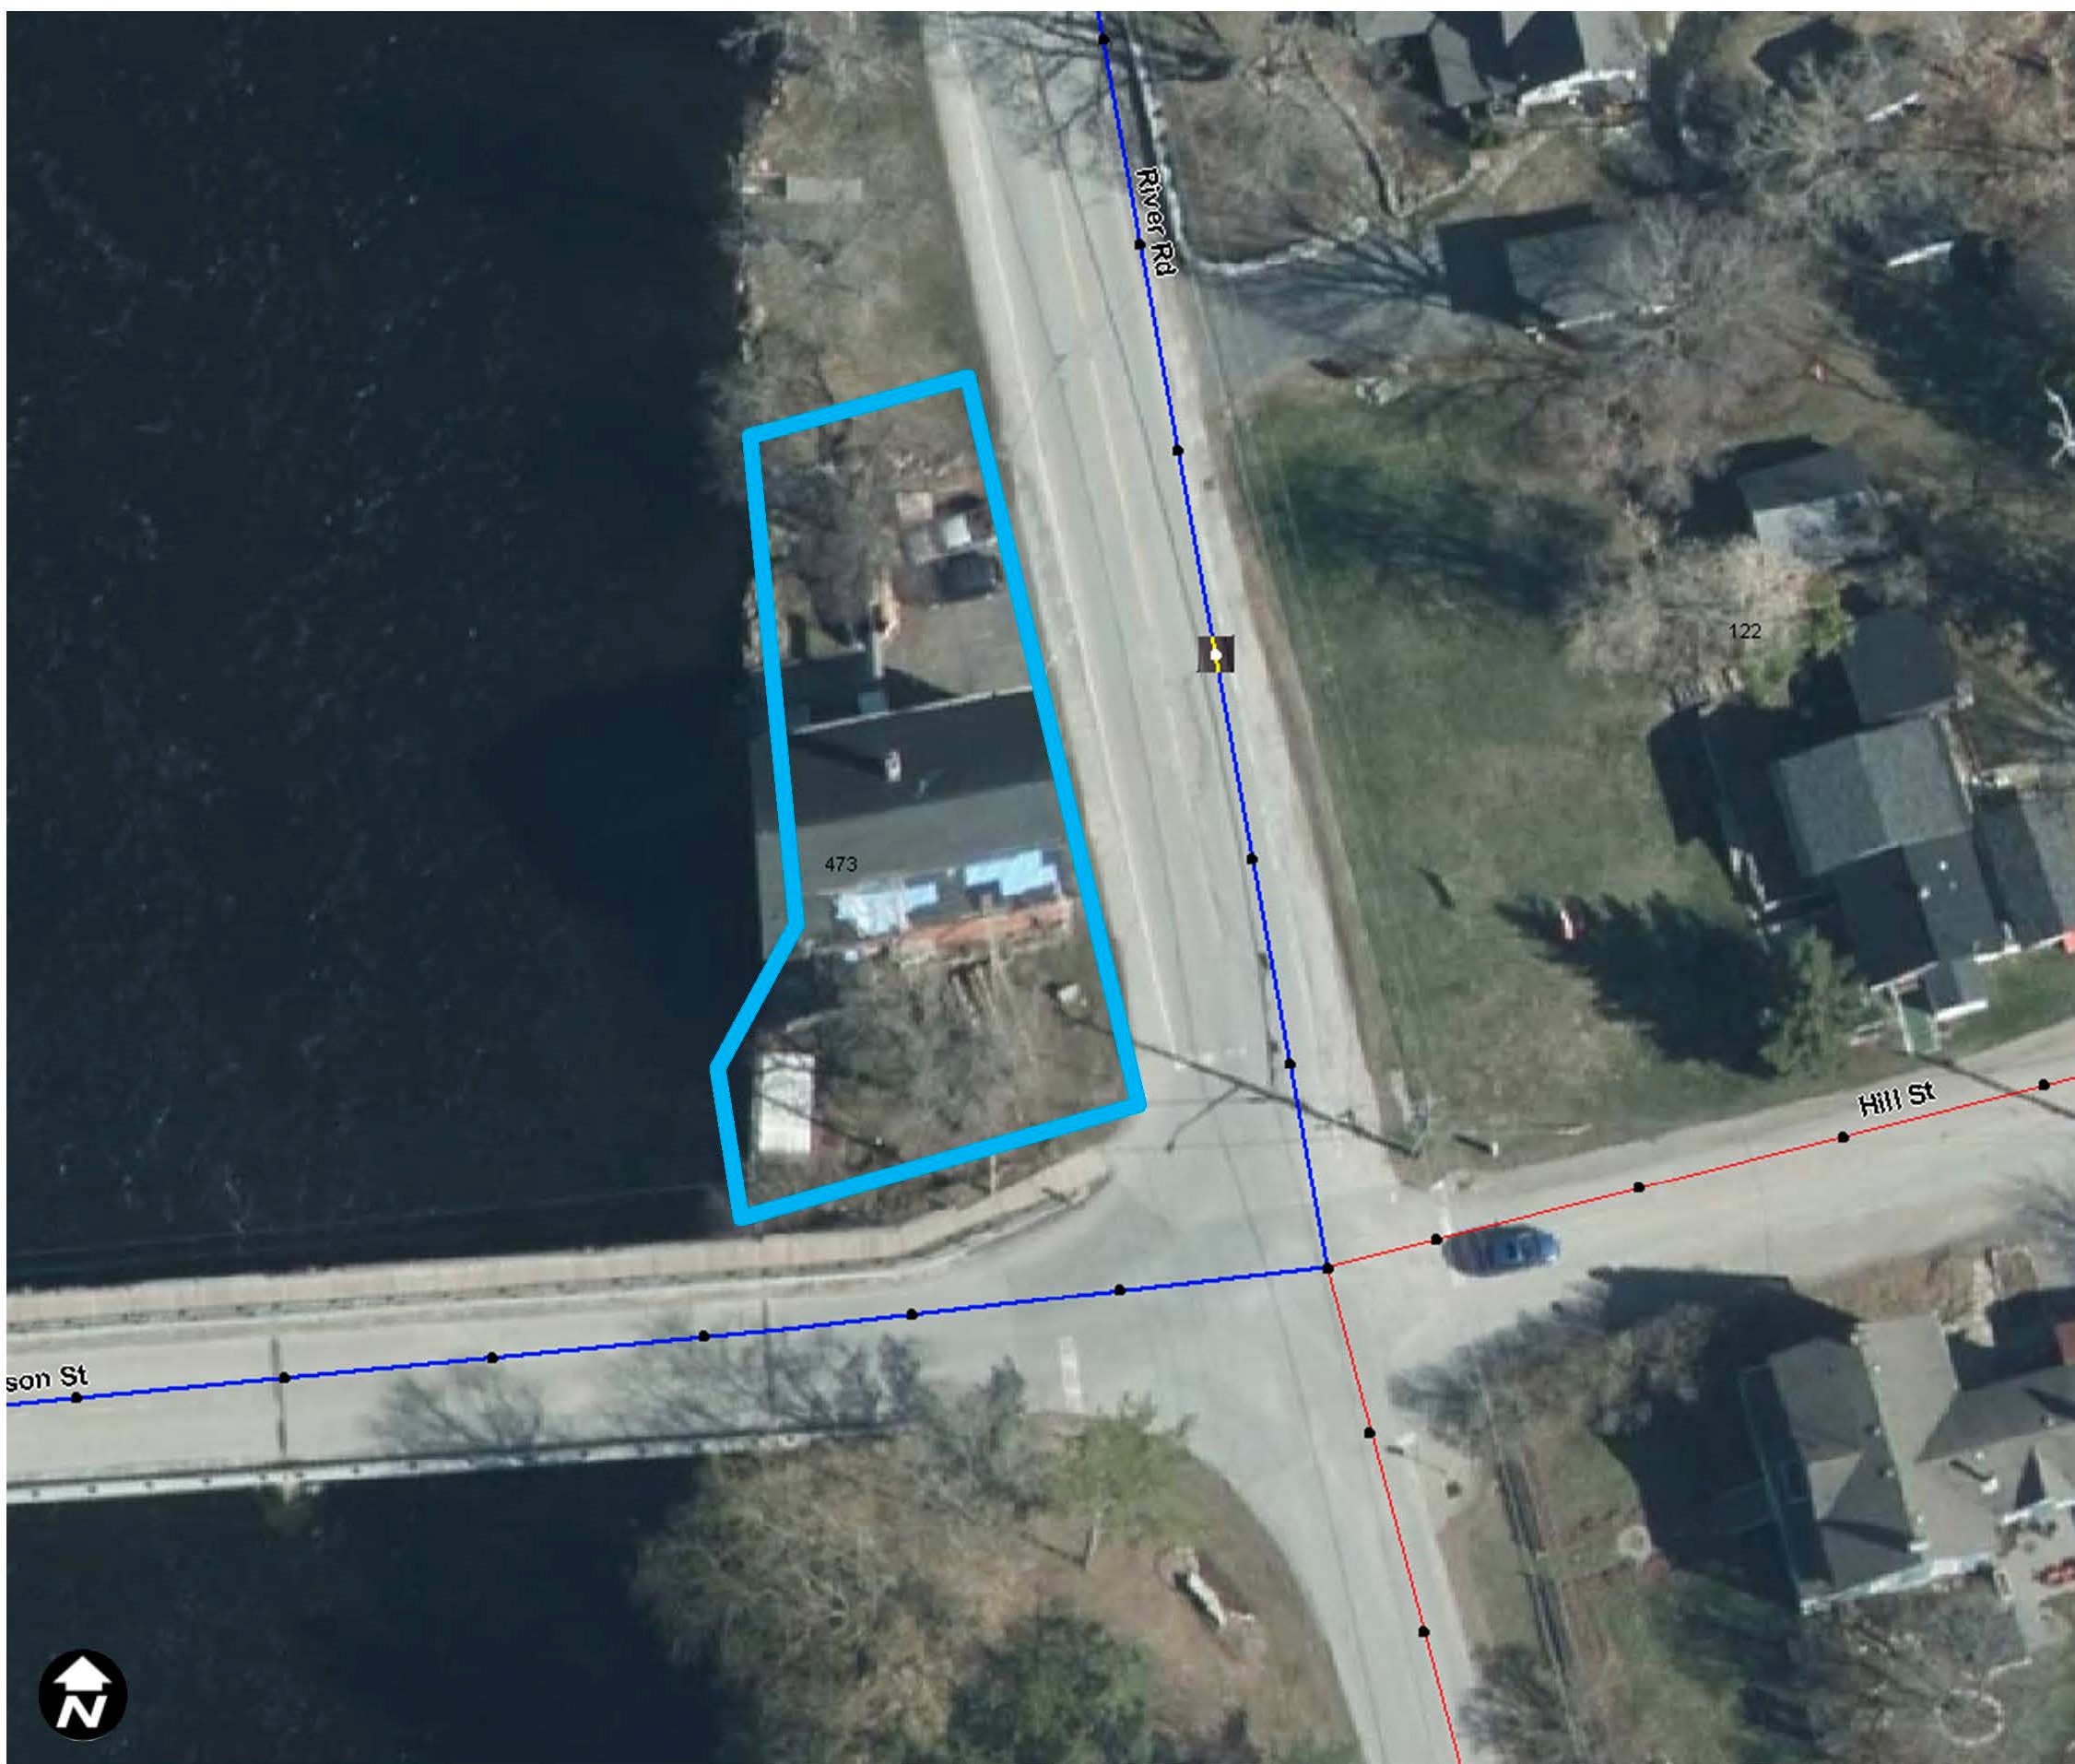 Aerial image showing 473 River Road in Appleton